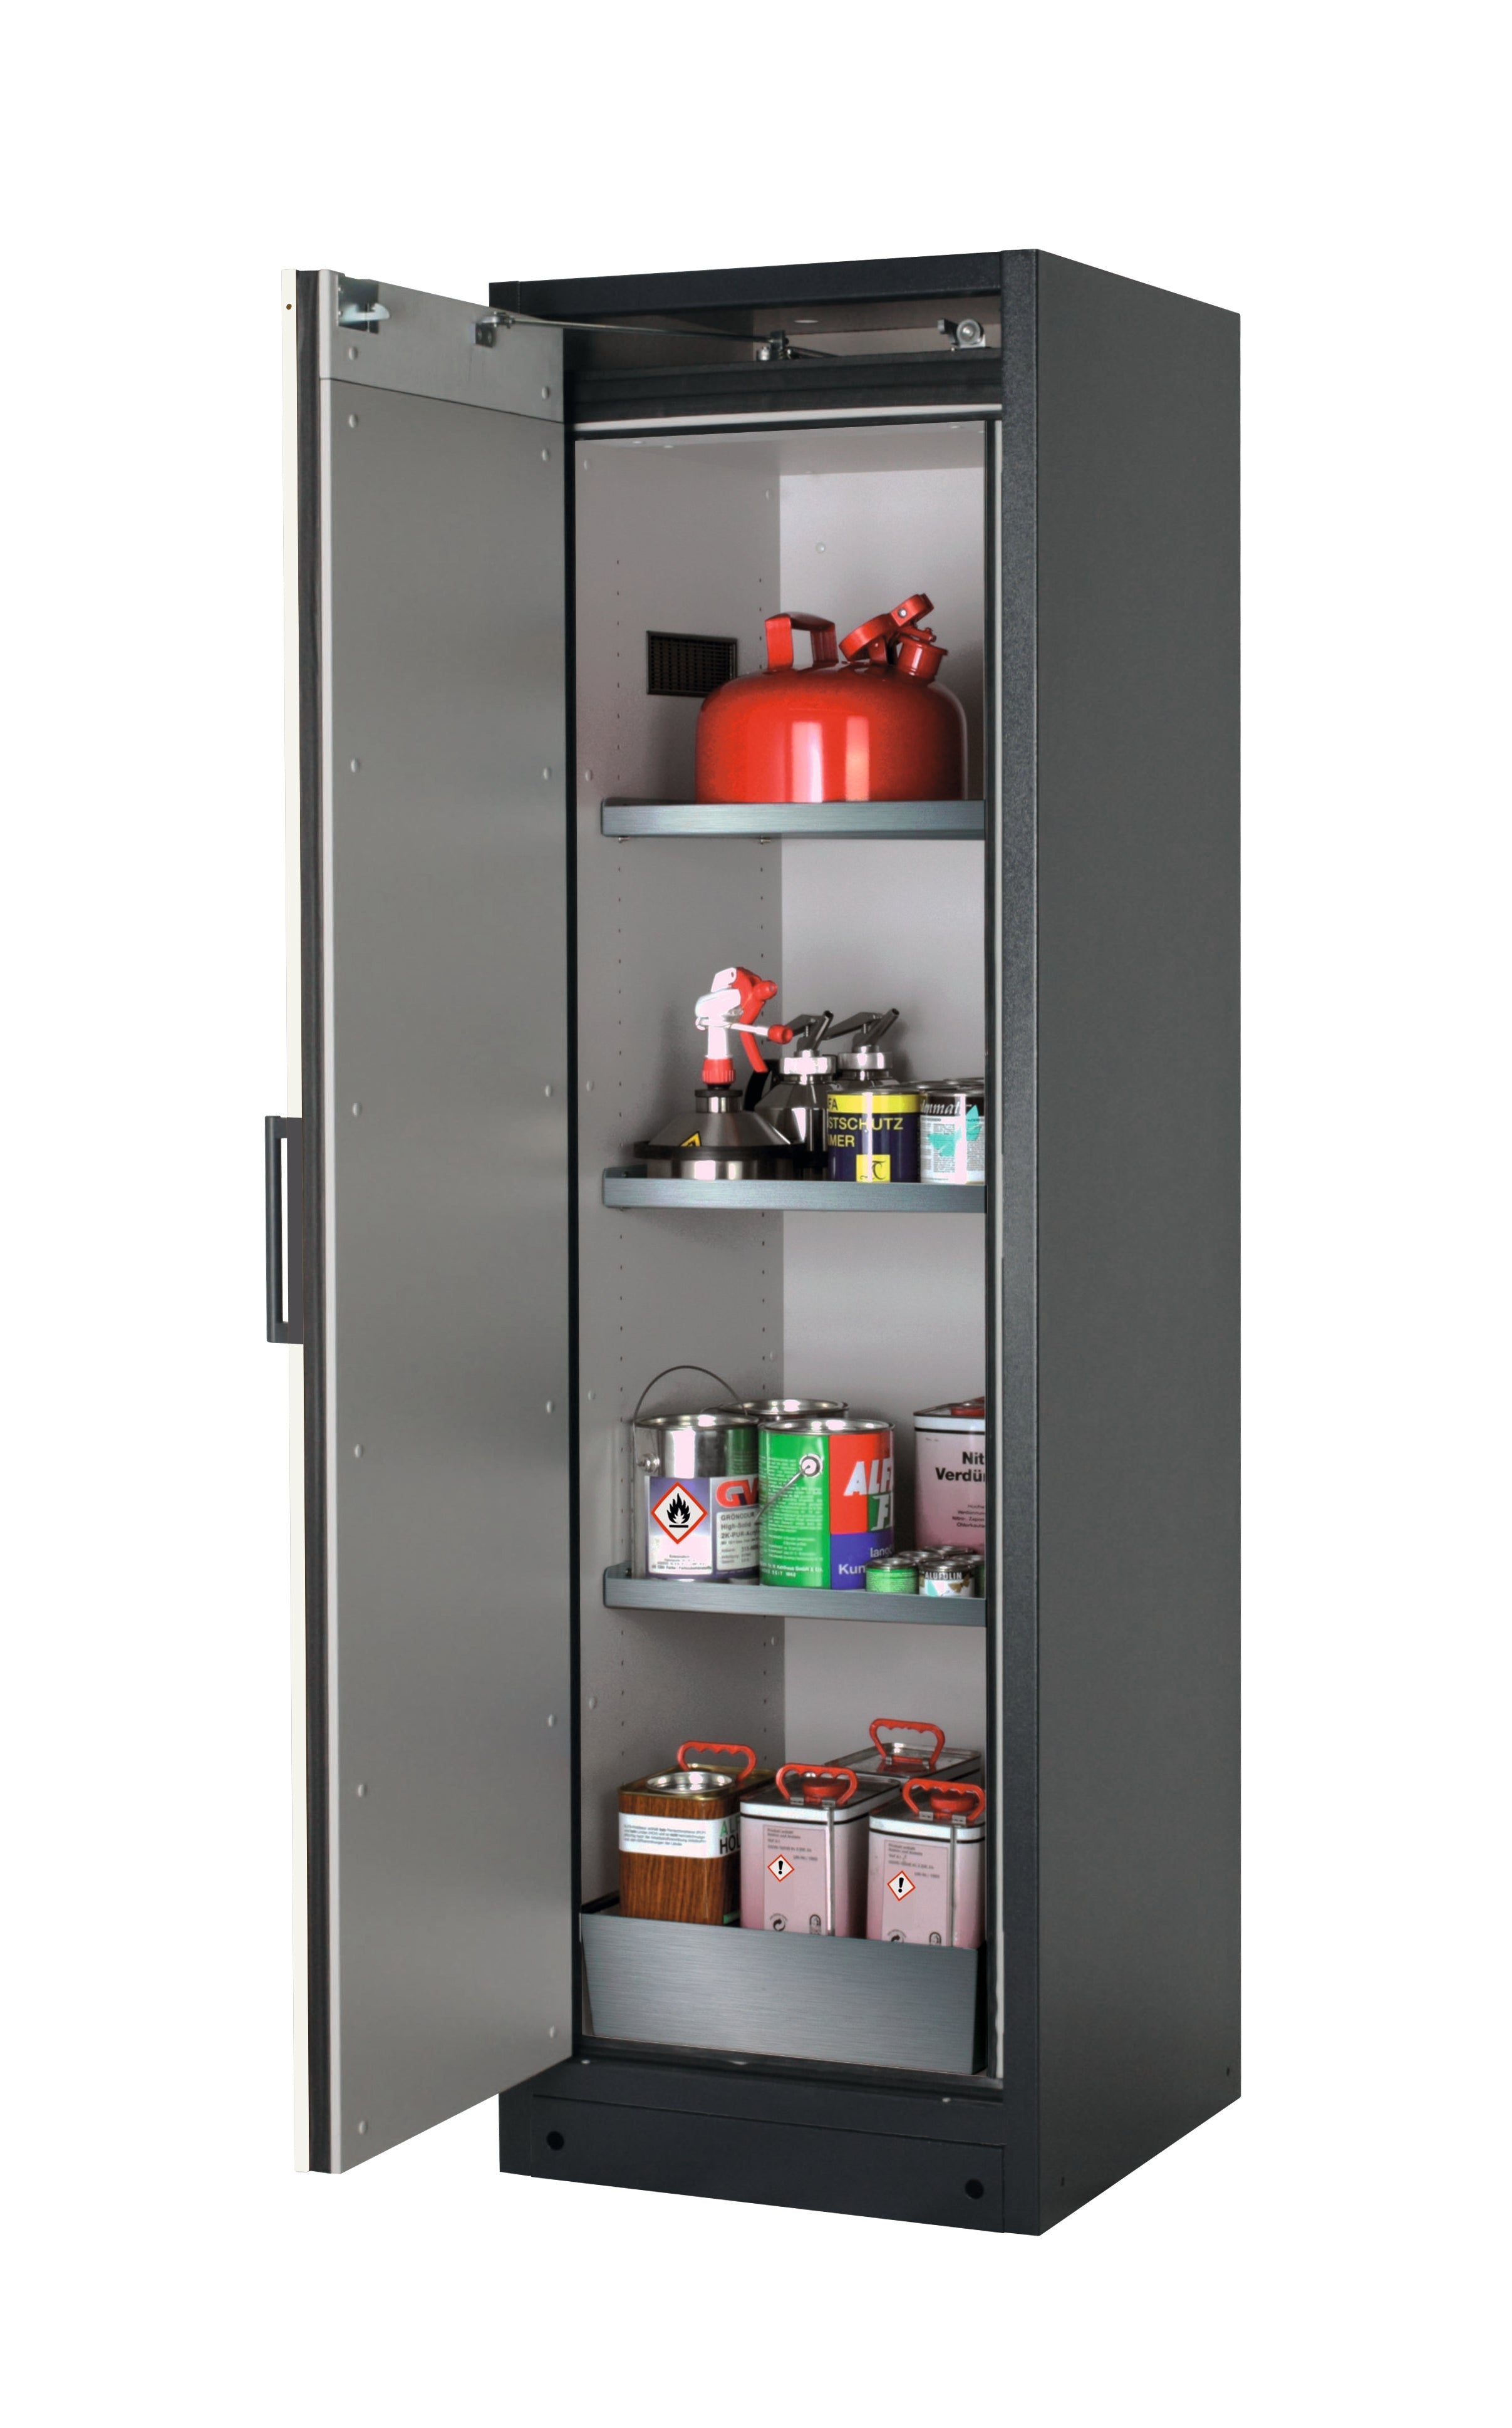 Type 90 safety storage cabinet Q-CLASSIC-90 model Q90.195.060 in asecos silver with 3x shelf standard (stainless steel 1.4301),